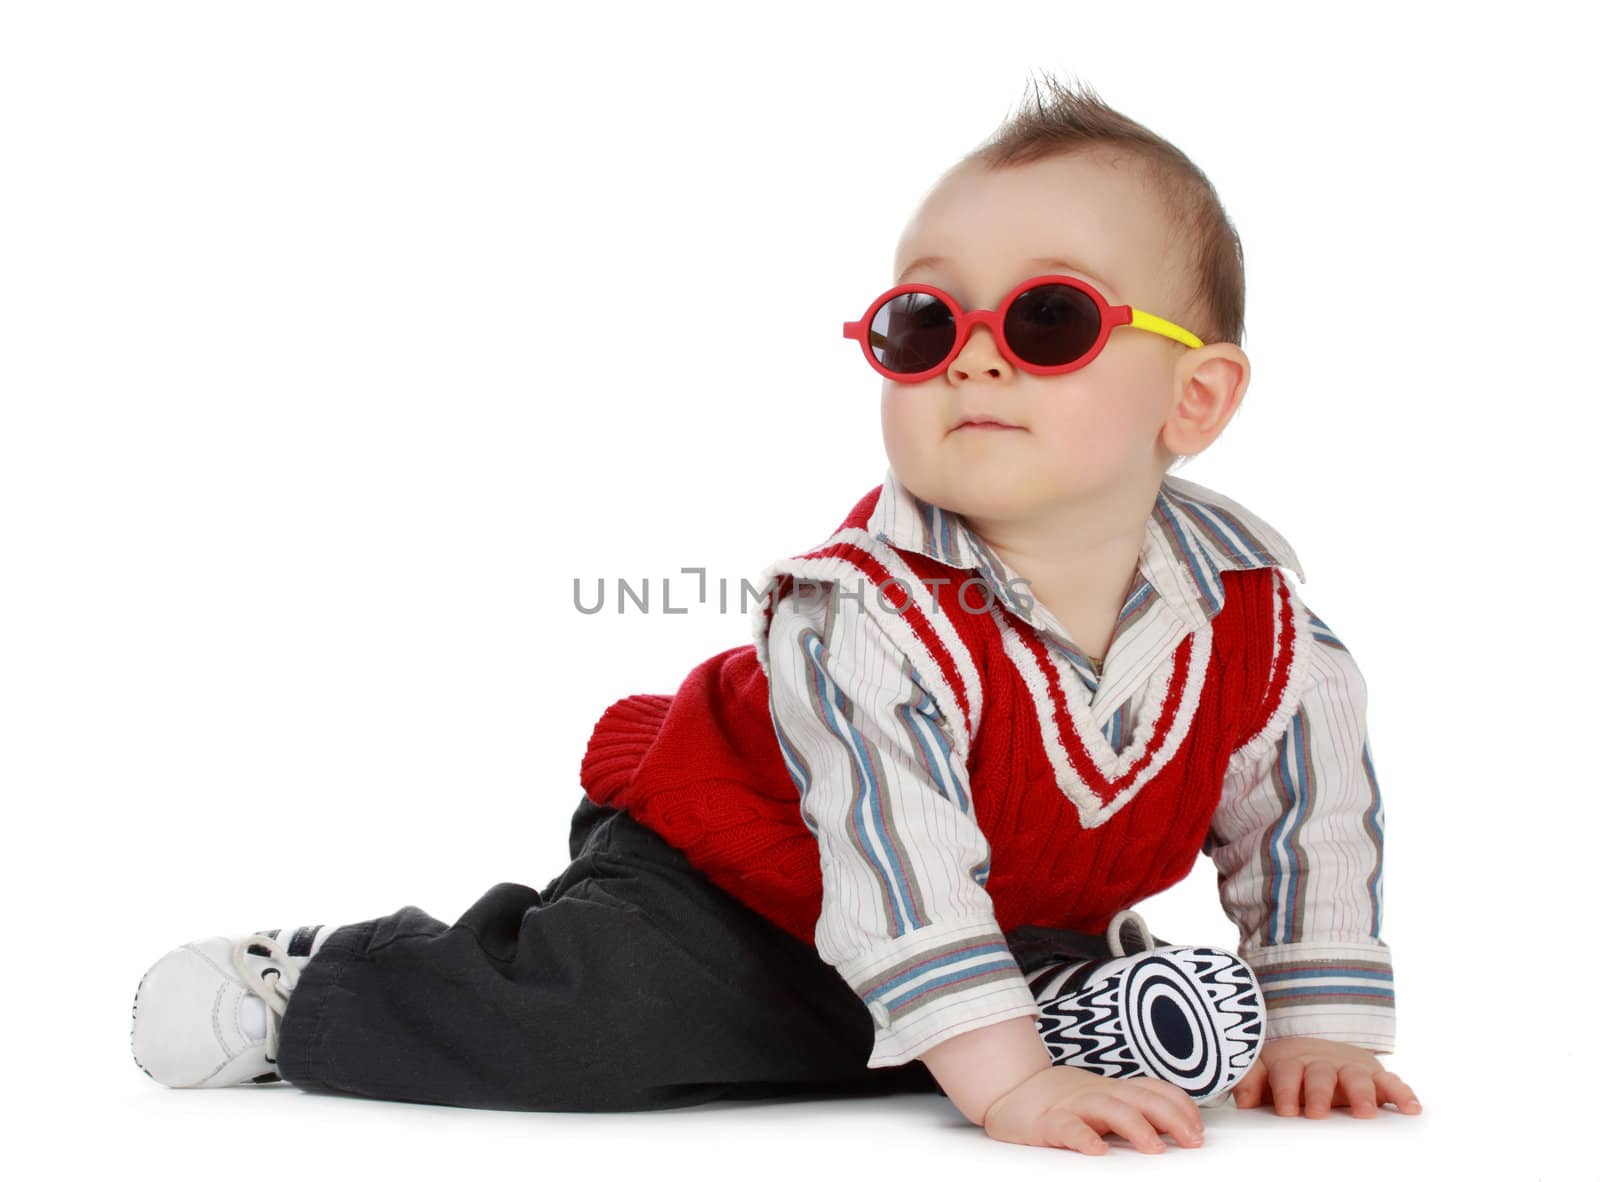 adorable 8 months cacasian baby boy with sunglasses